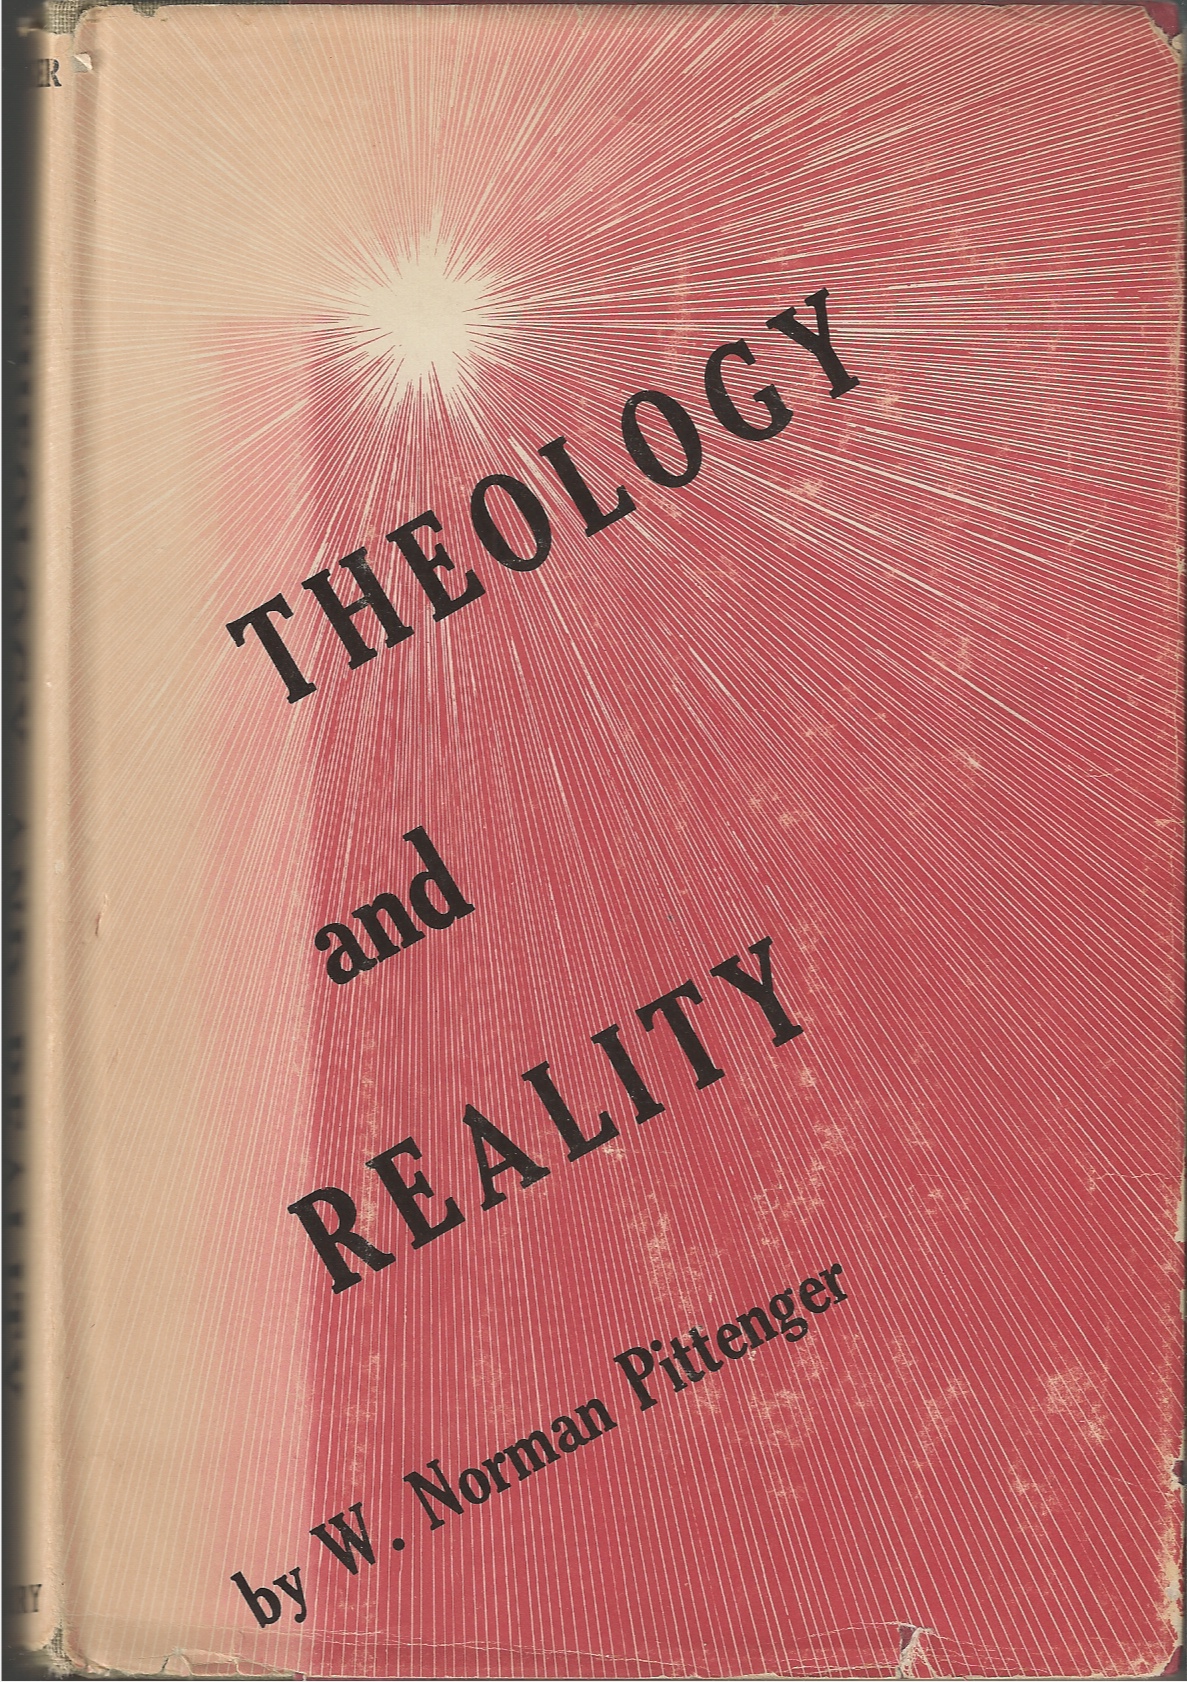 PITTENGER NORMAN W. - Theology and Reality Essays in Restatement